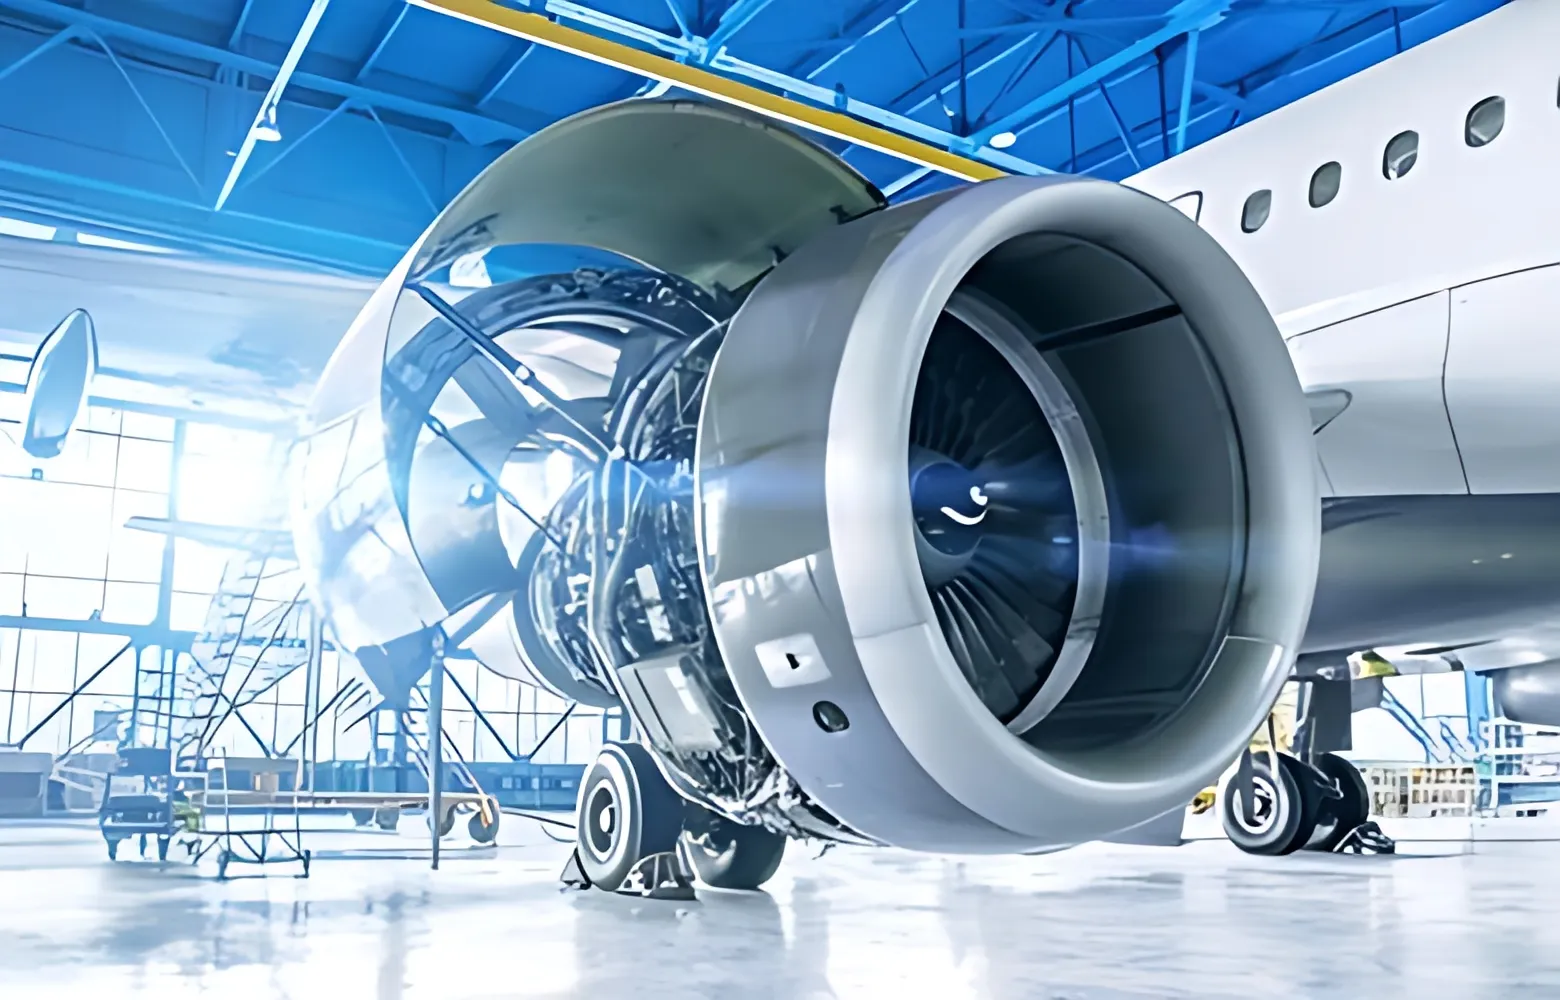 Lifting Giants: The Powerhouse Behind Modern Aviation’s Functions